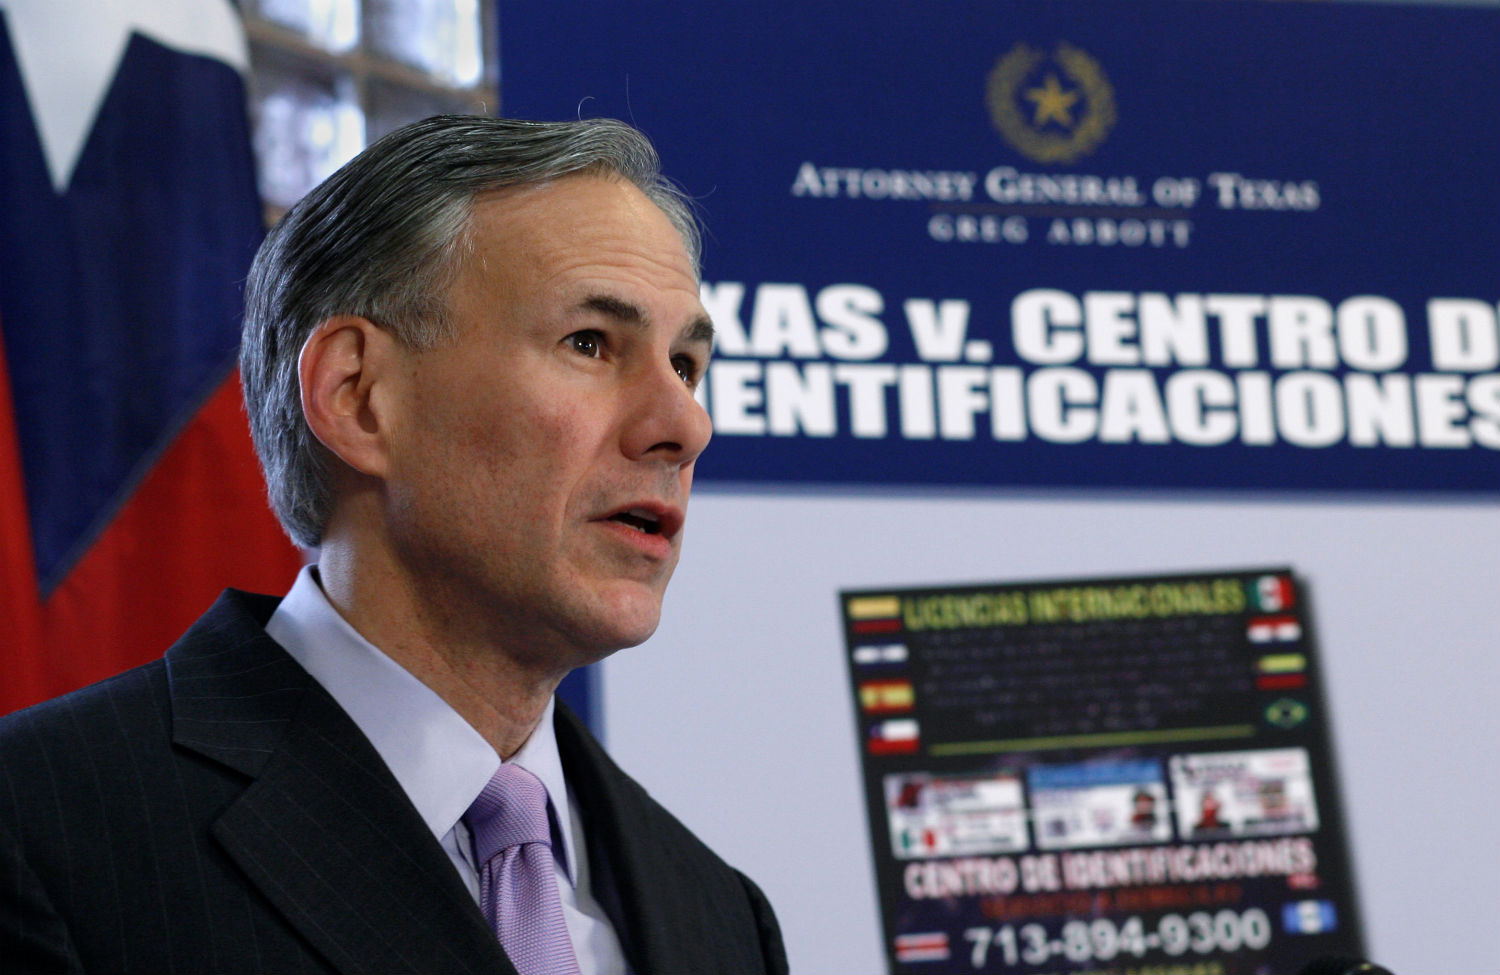 Texas Voter ID Law Ensnares Former Speaker of the House, Candidates for Governor, State Judge